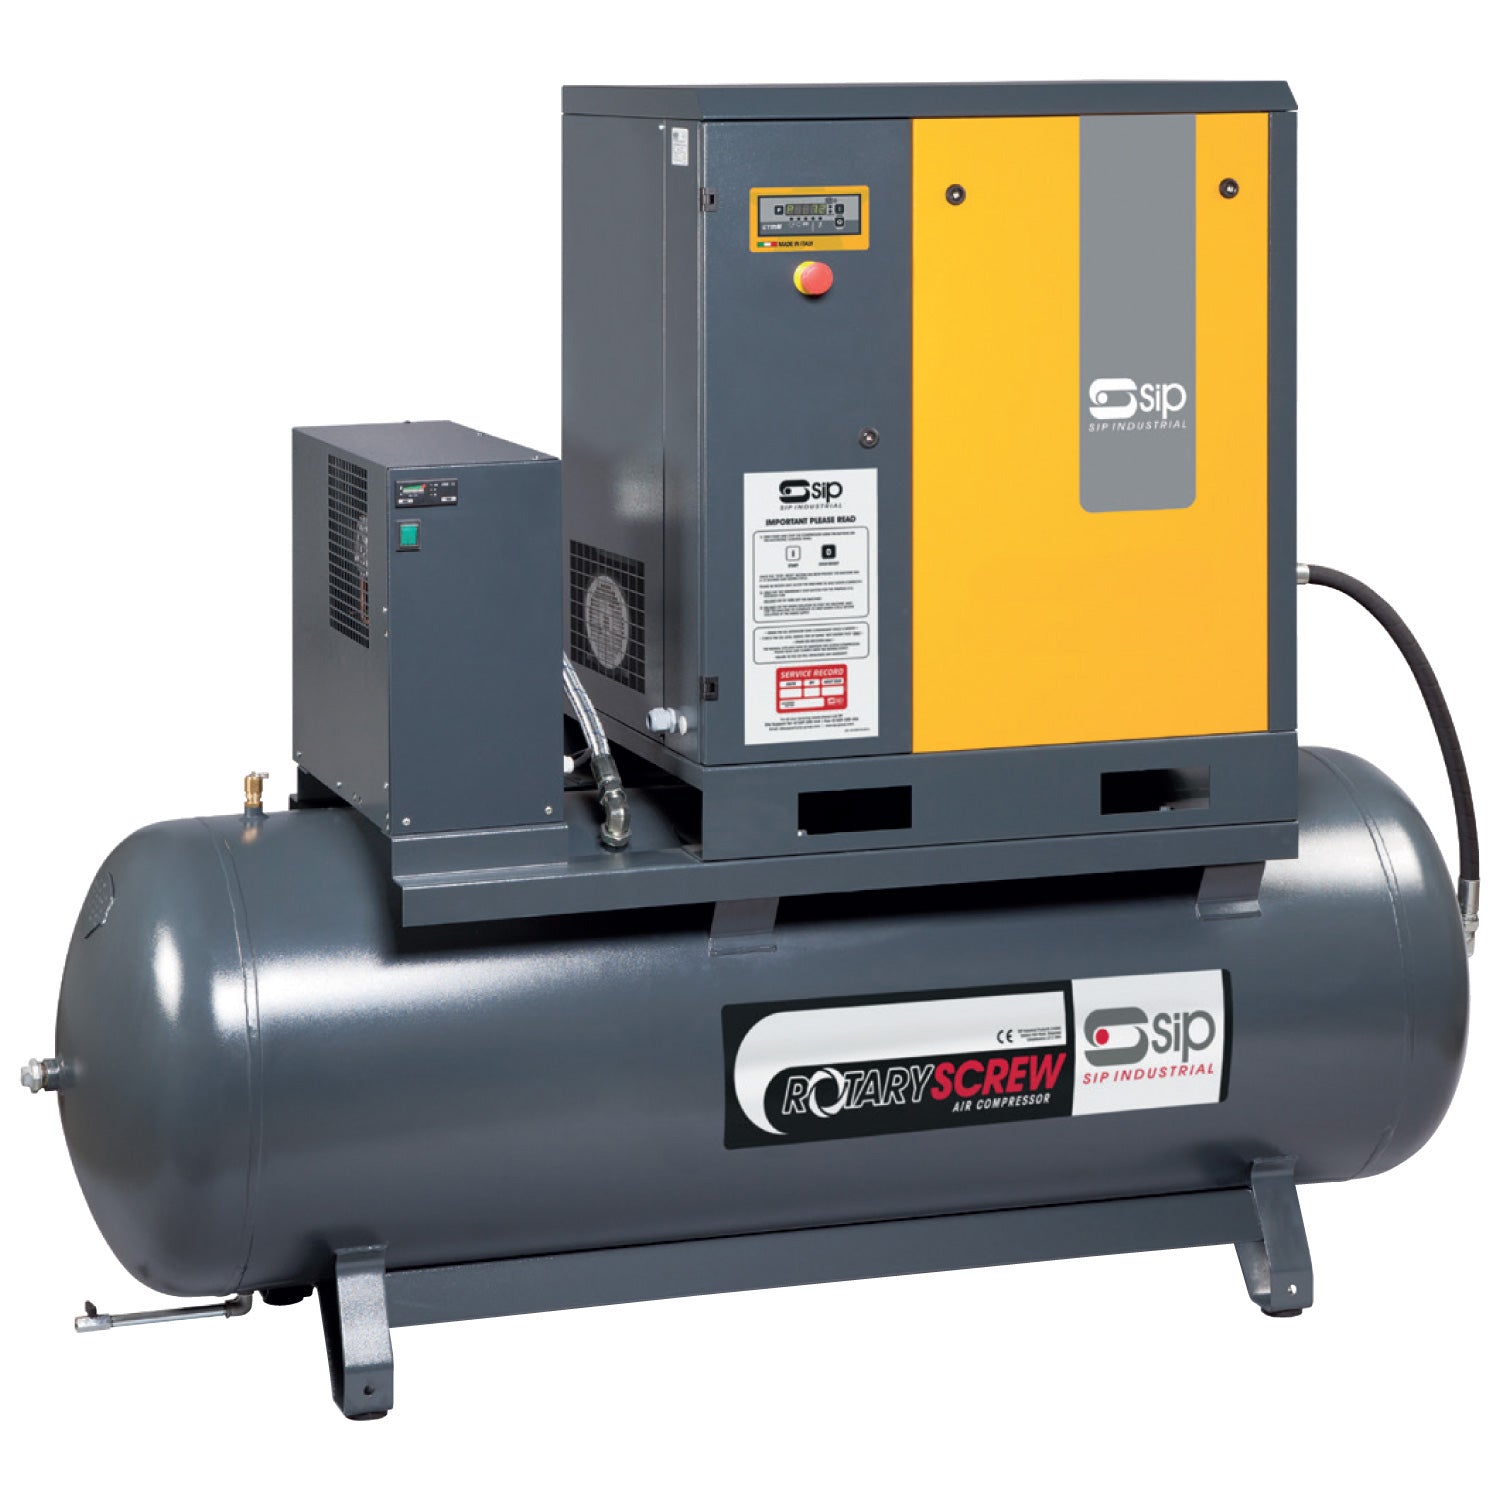 SIP RS08-10-500BD/RD 500ltr Rotary Screw Compressor with Dryer, Sip Industrial